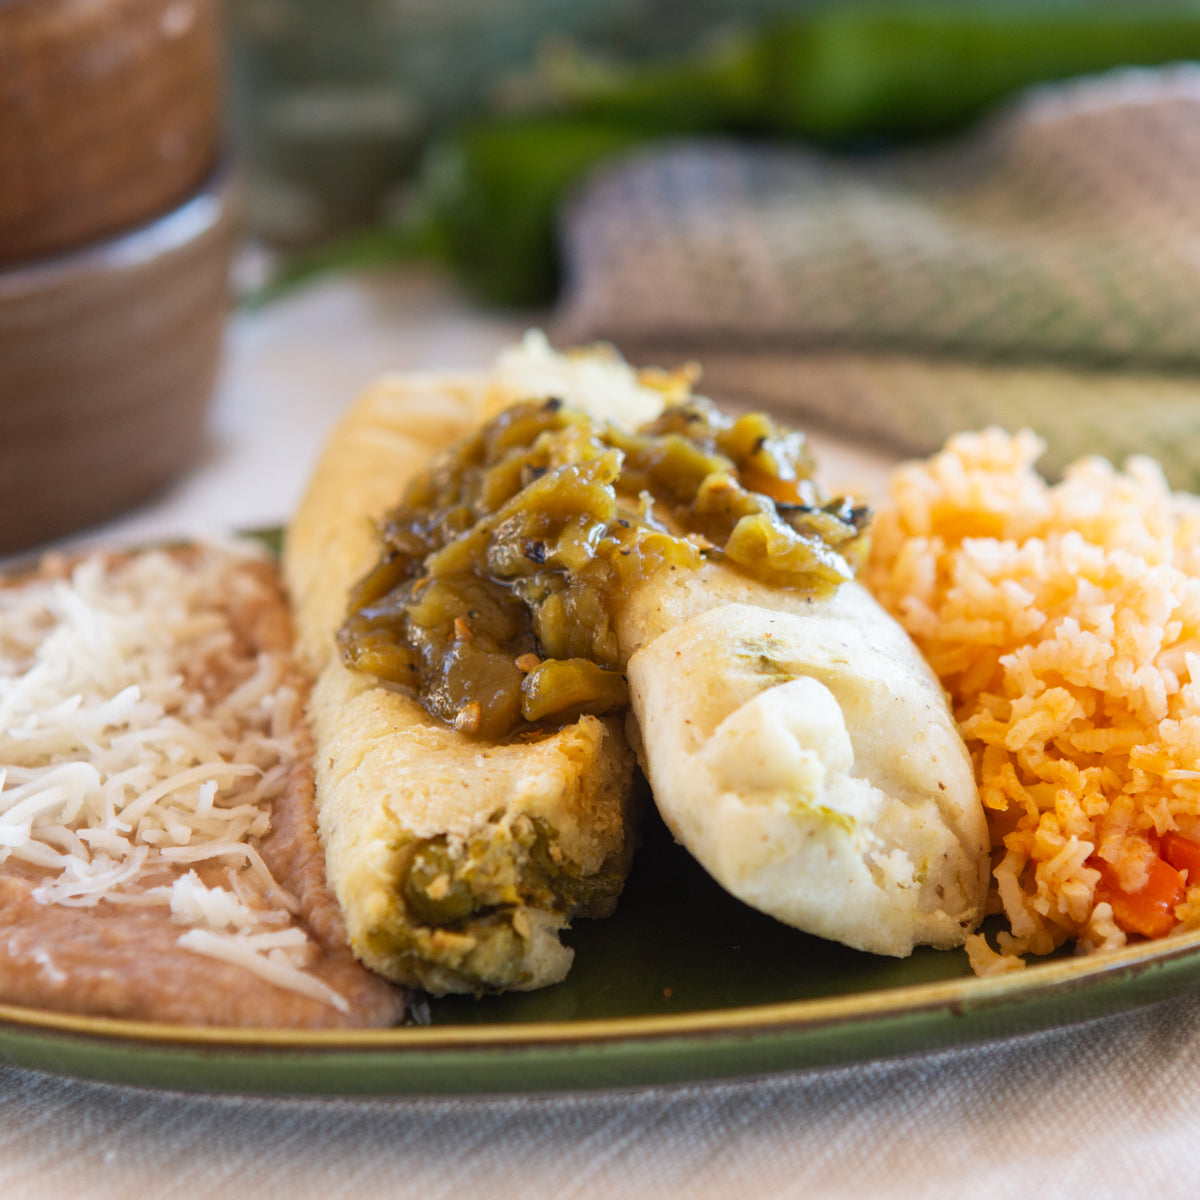 A plate with a Hatch Green Chile Veggie Tamales topped with Hatch Green Chile sauce, accompanied by Spanish rice and refried beans, presented on a textured tablecloth.